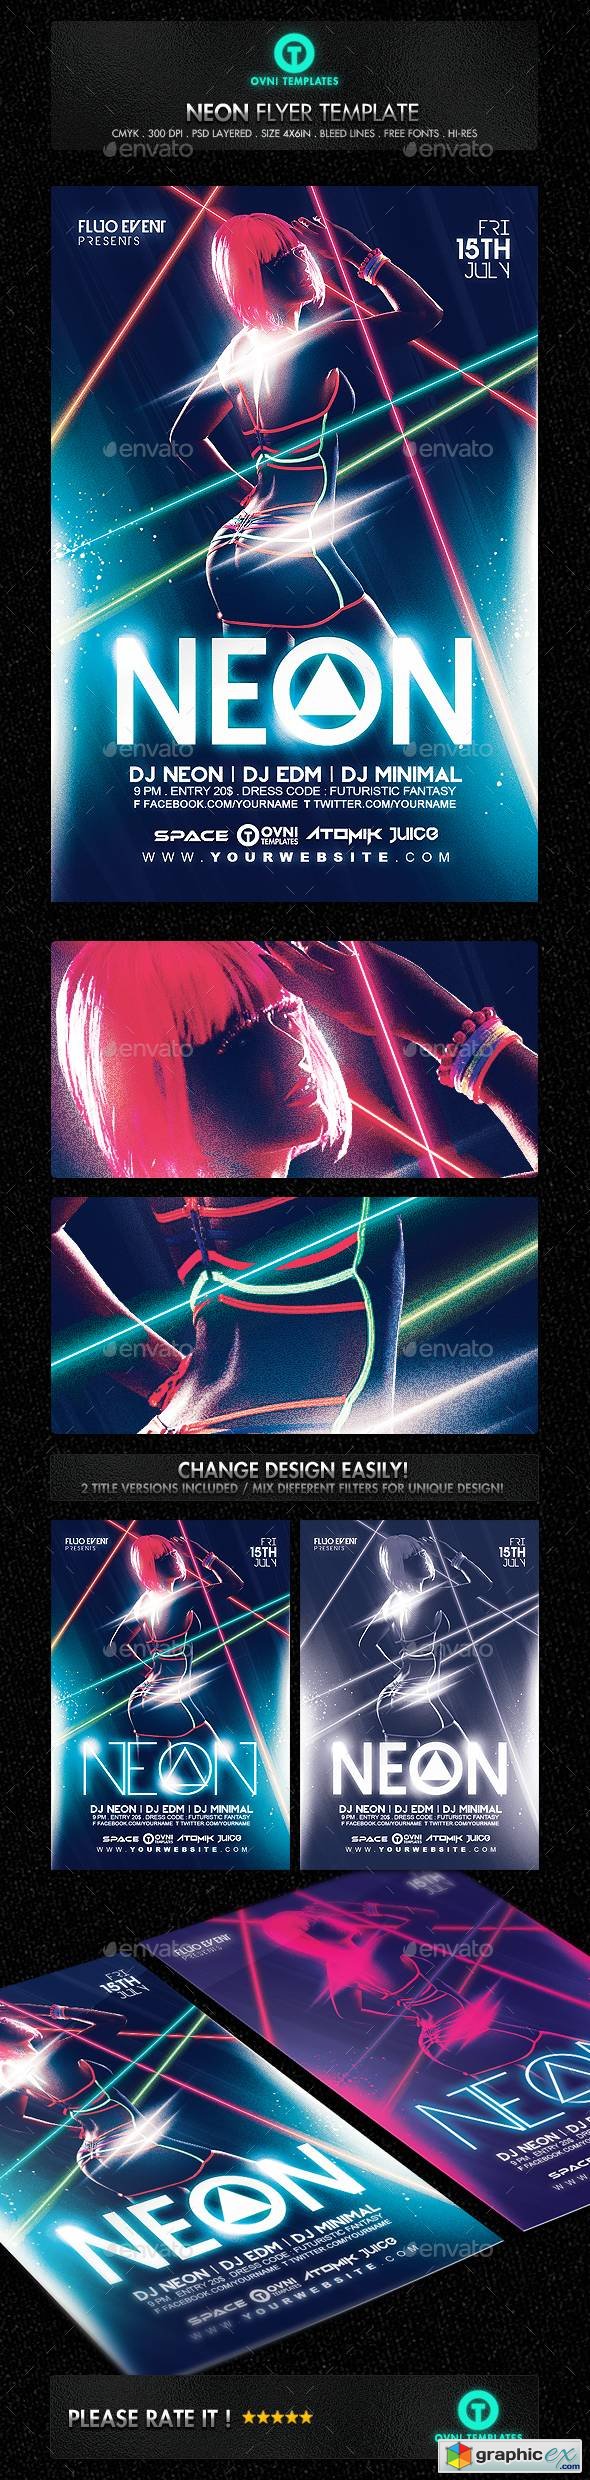 Neon Laser Fluo Light Sexy Flyer Template